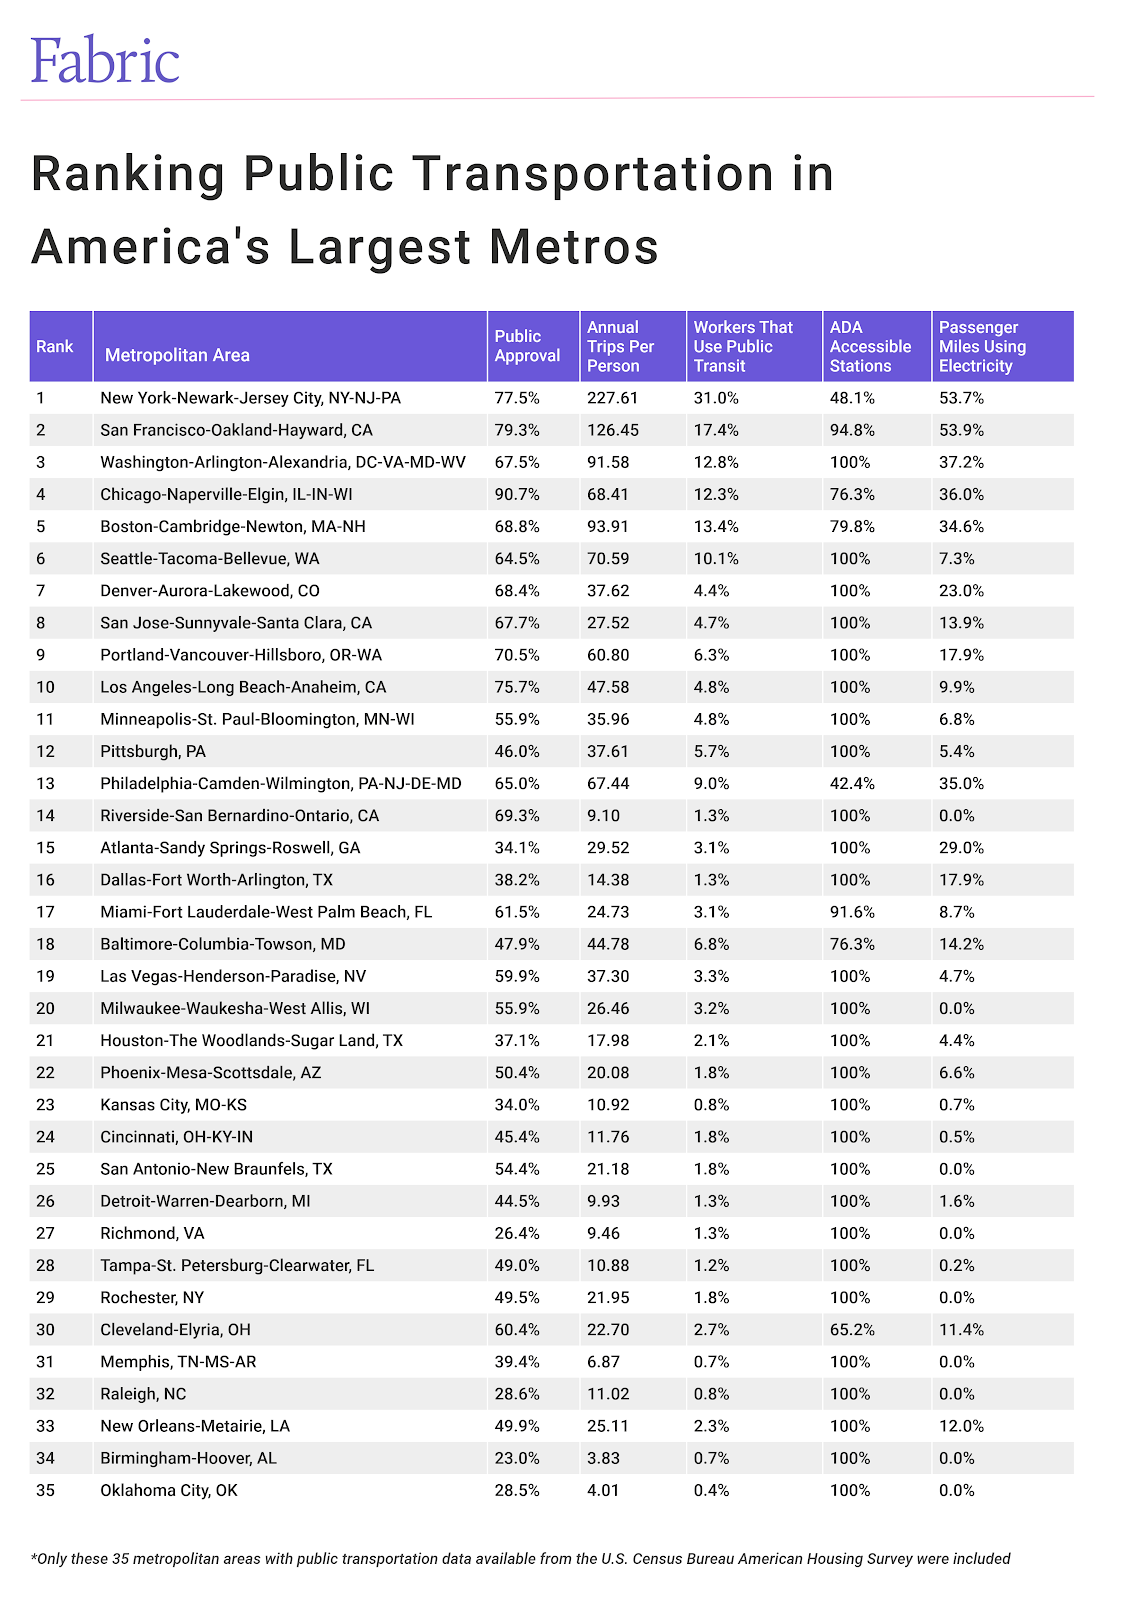 table - which large U.S. cities have the best public transportation?